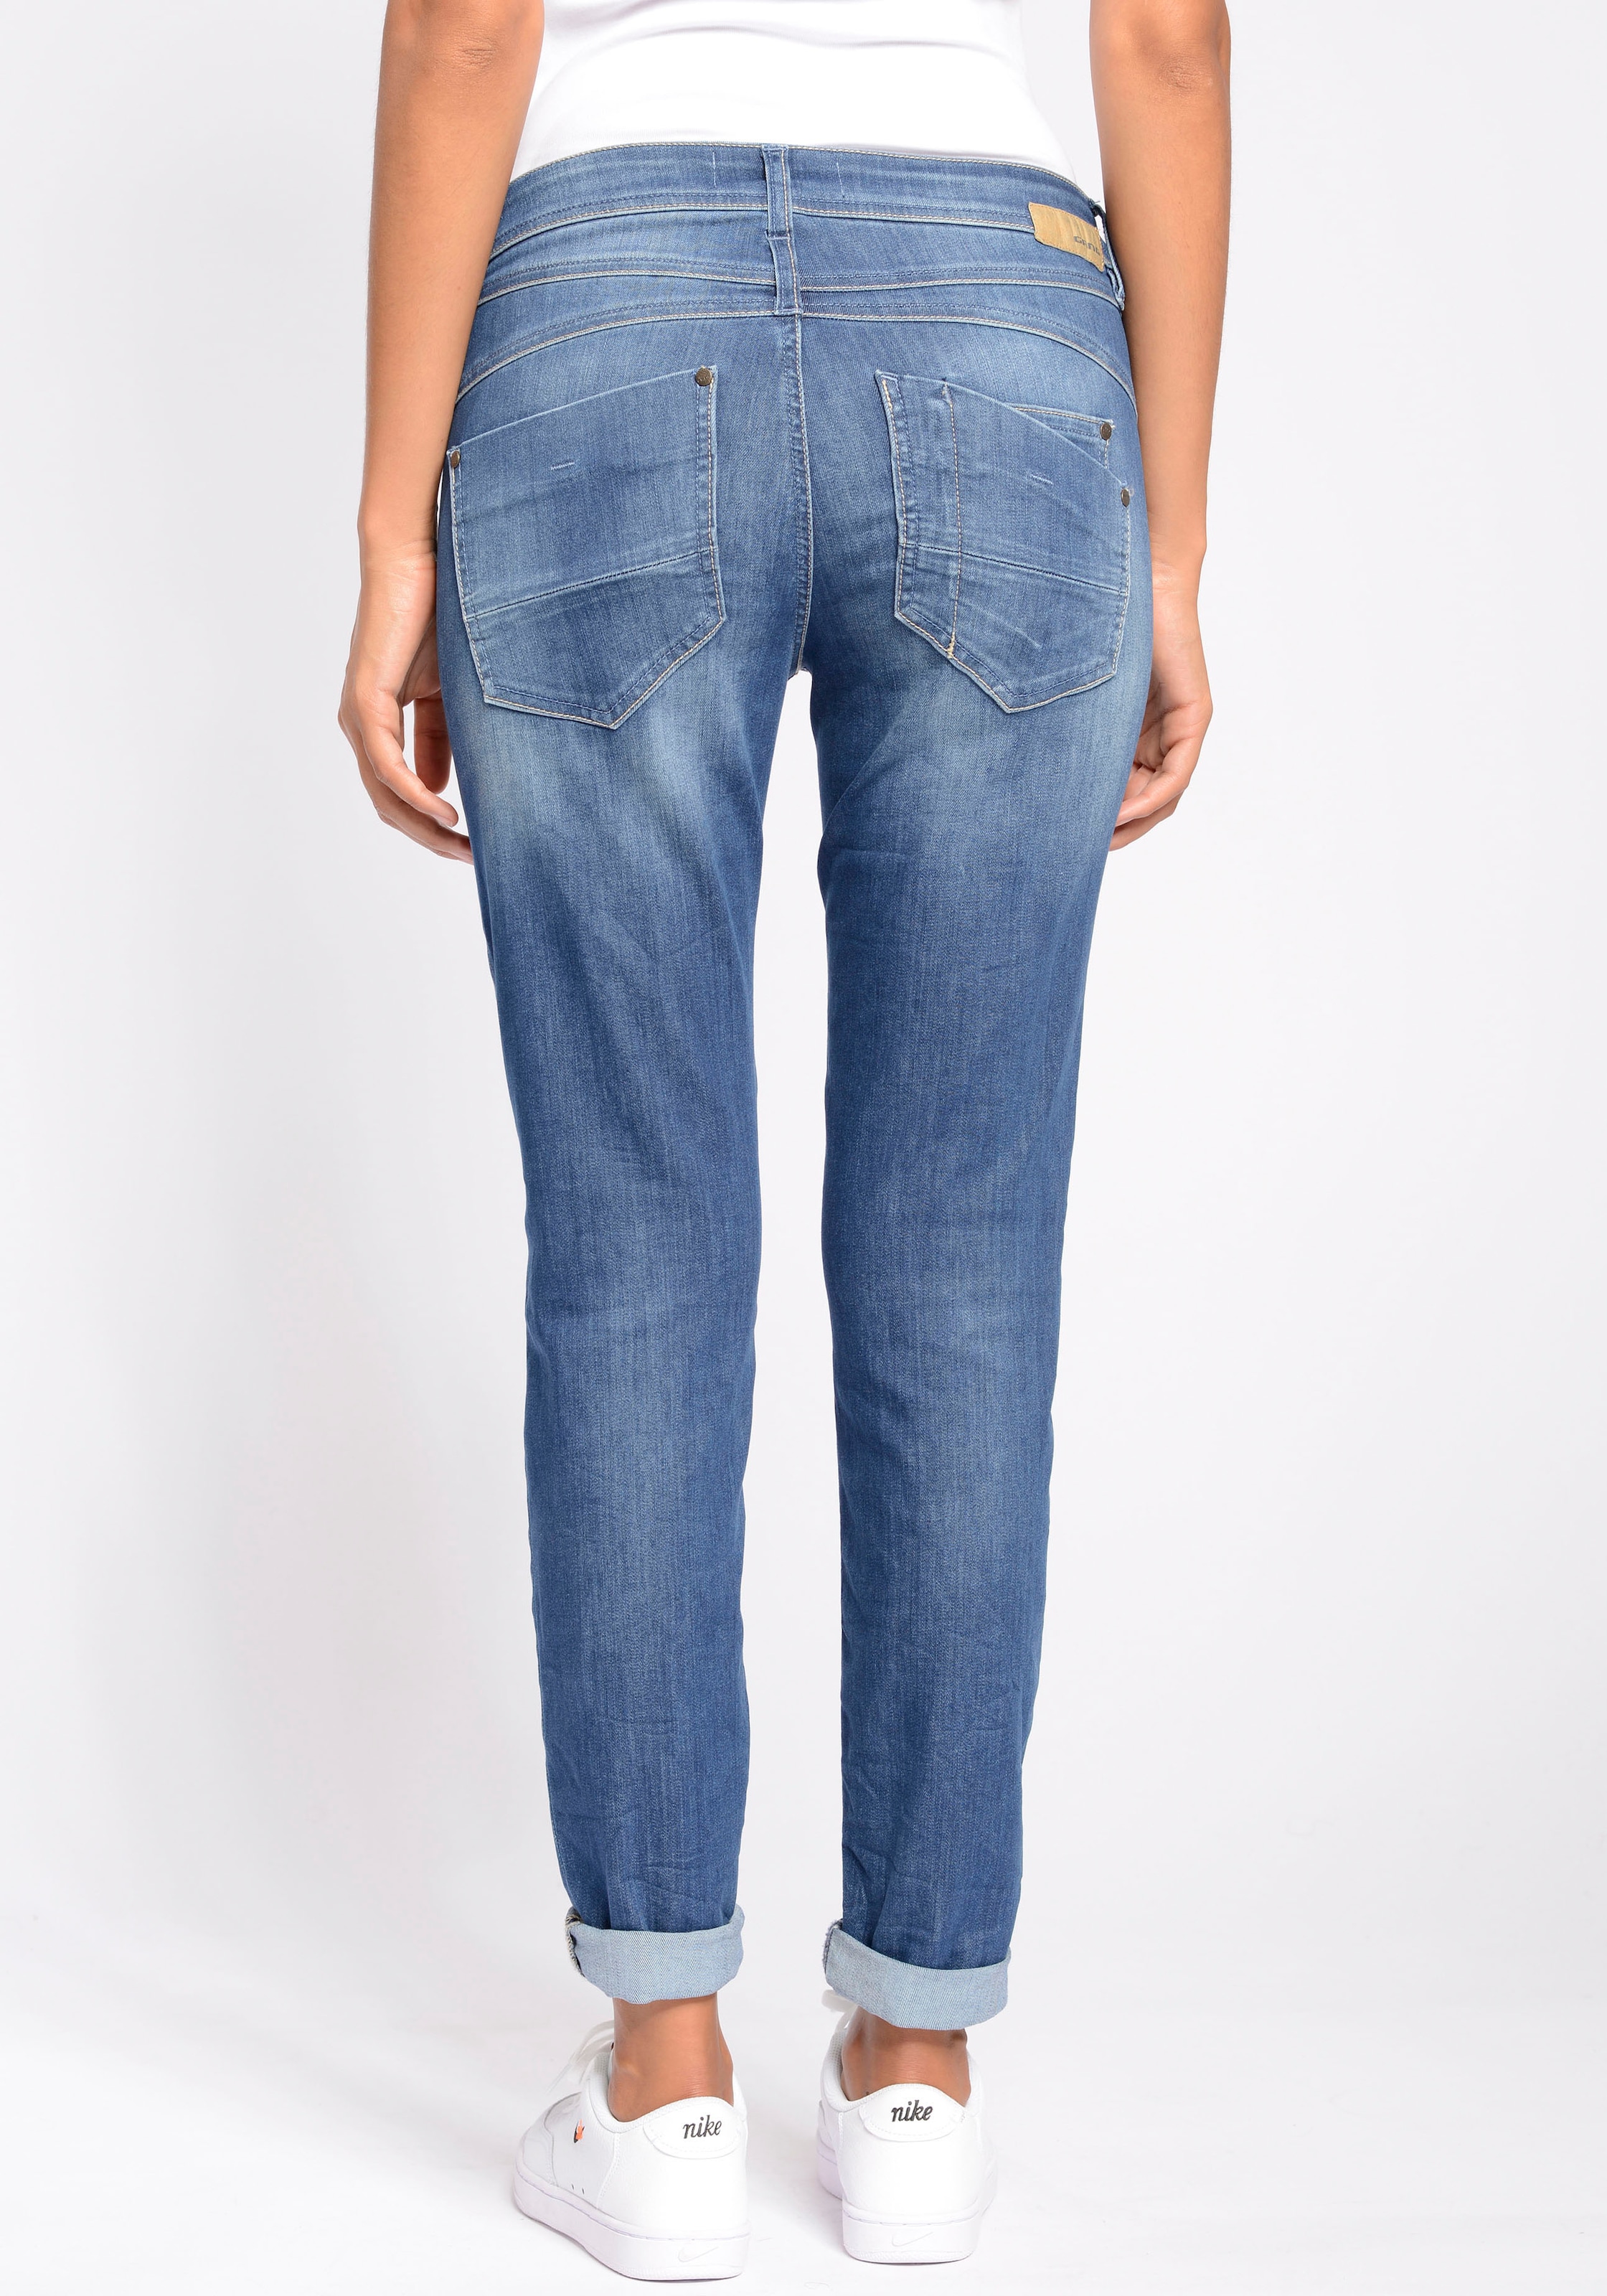 »94Amelie Used-Effekten ♕ Relax-fit-Jeans Relaxed mit GANG bei Fit«,